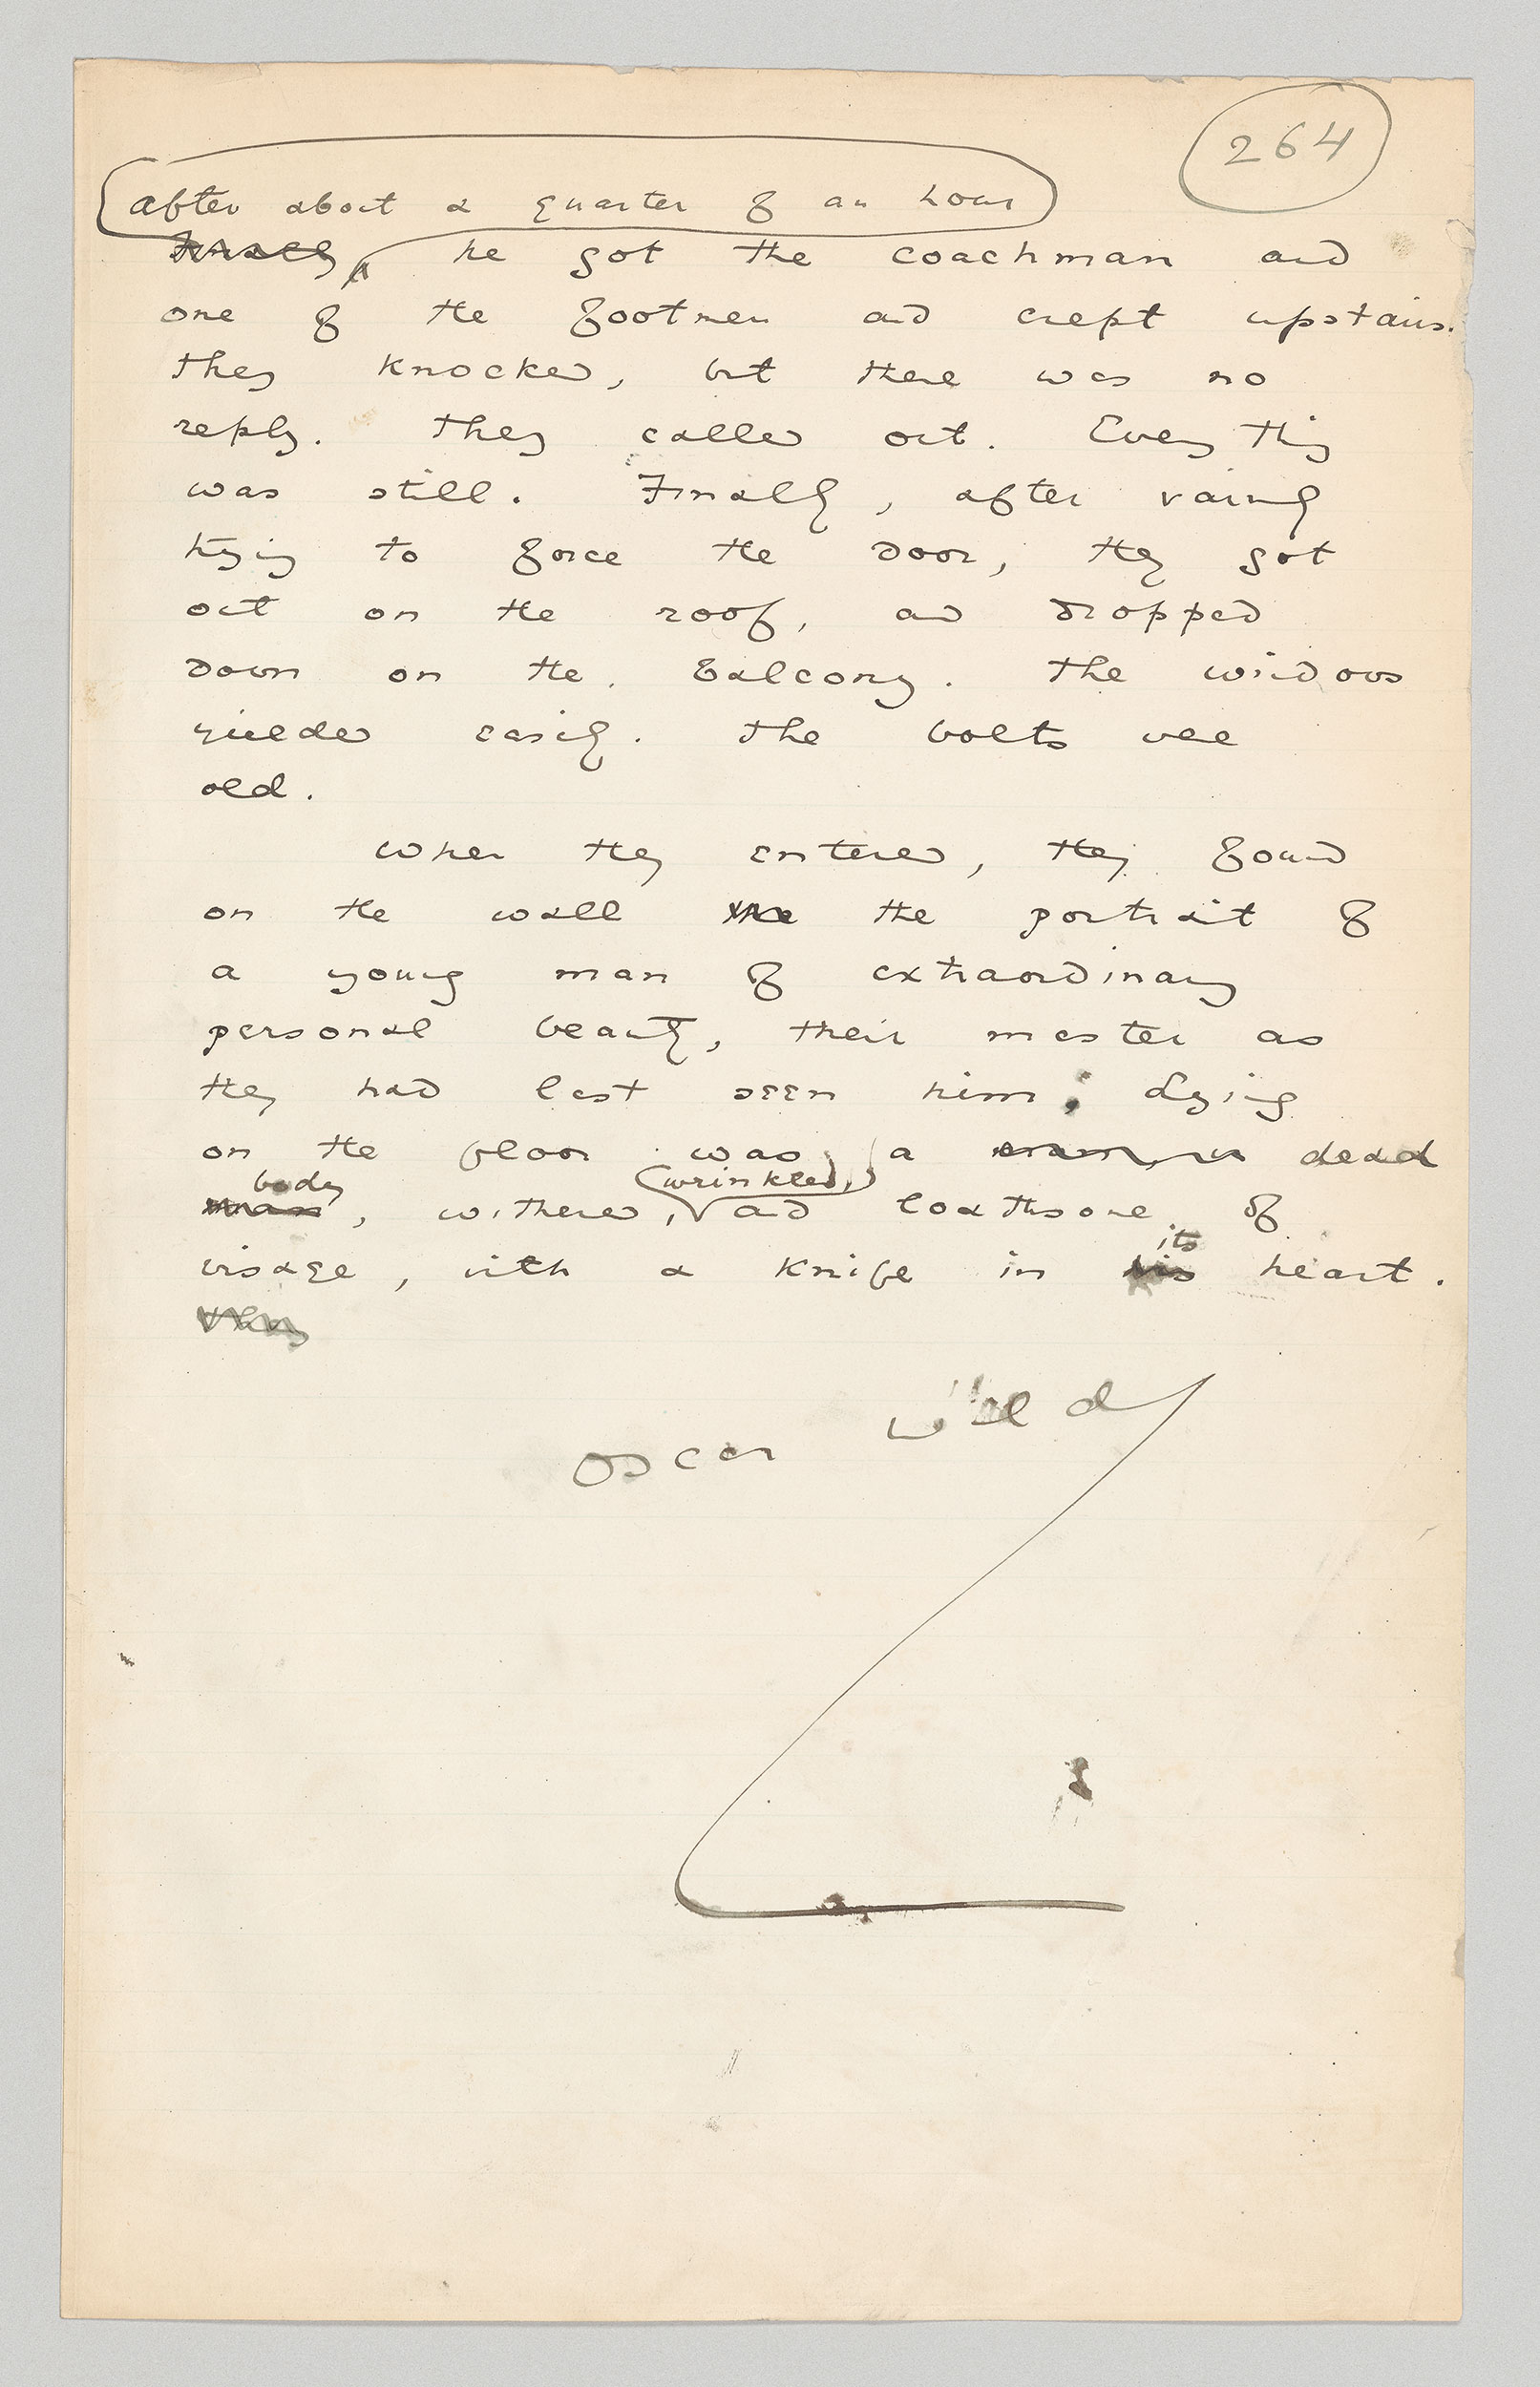 MA 883, p. 264 | The Picture of Dorian Gray | The Morgan Library & Museum